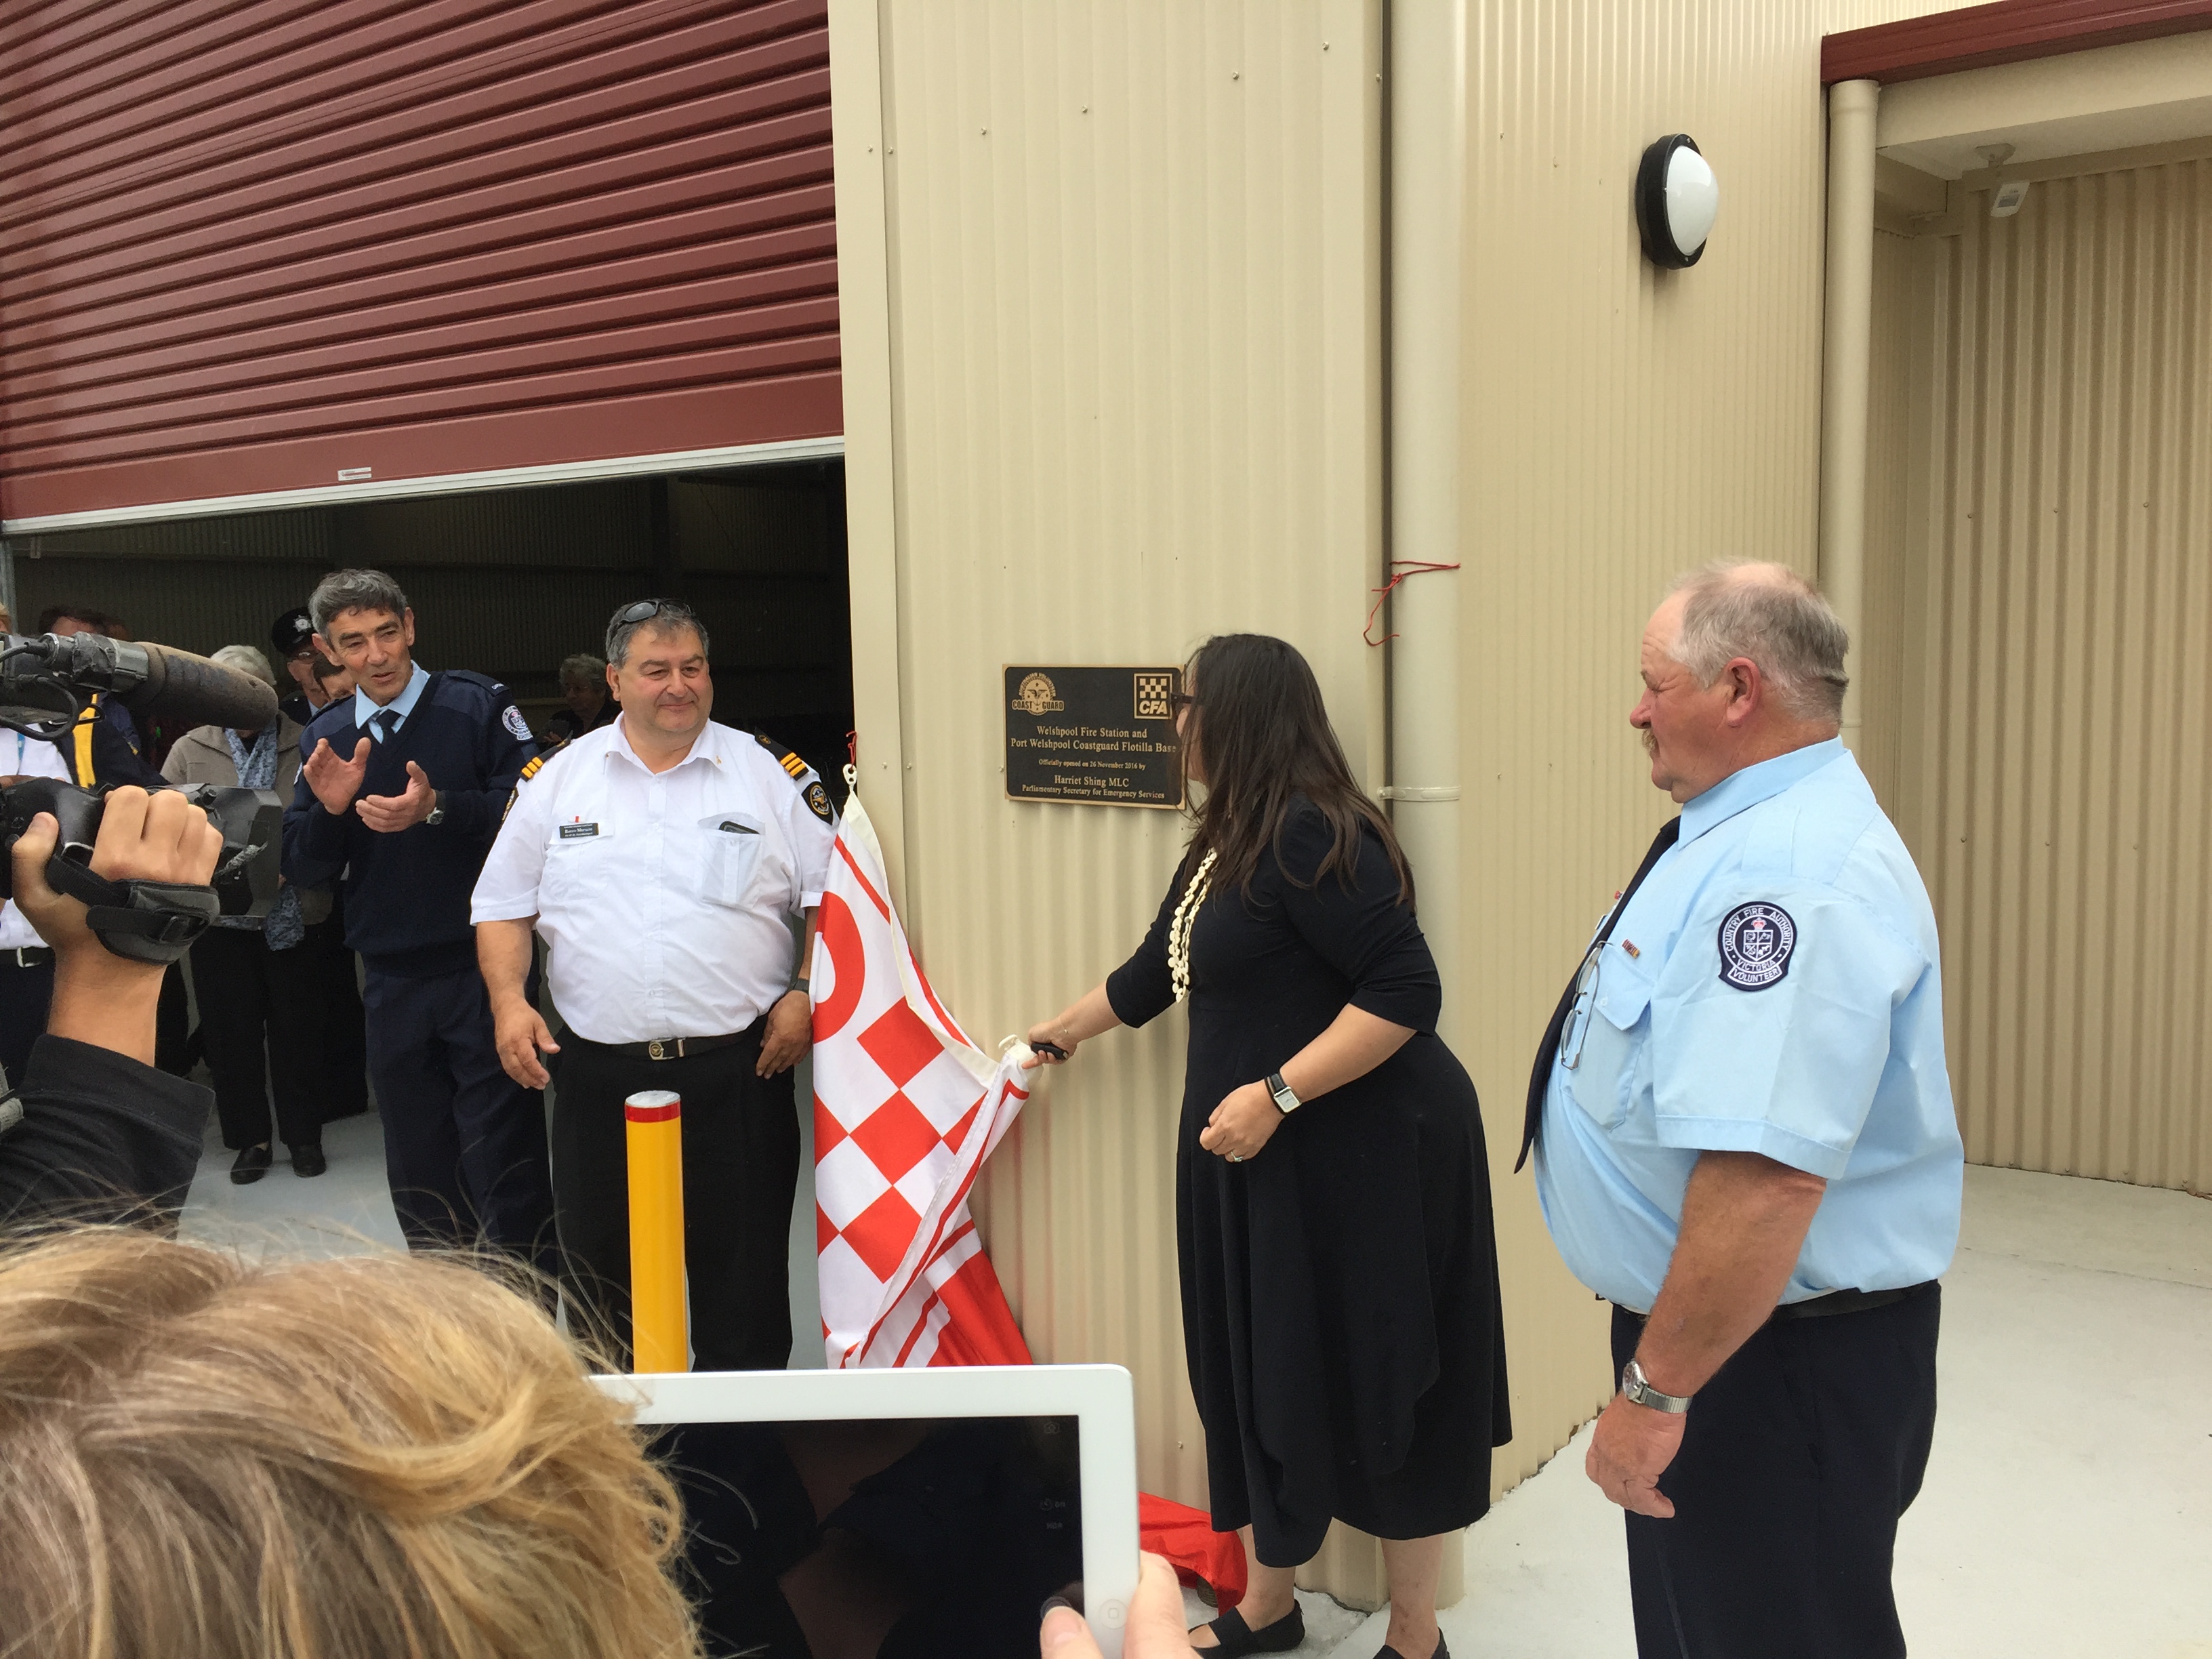 The Official Opening of the new Welshpool CFA and Port Welshpool Coast Guard building